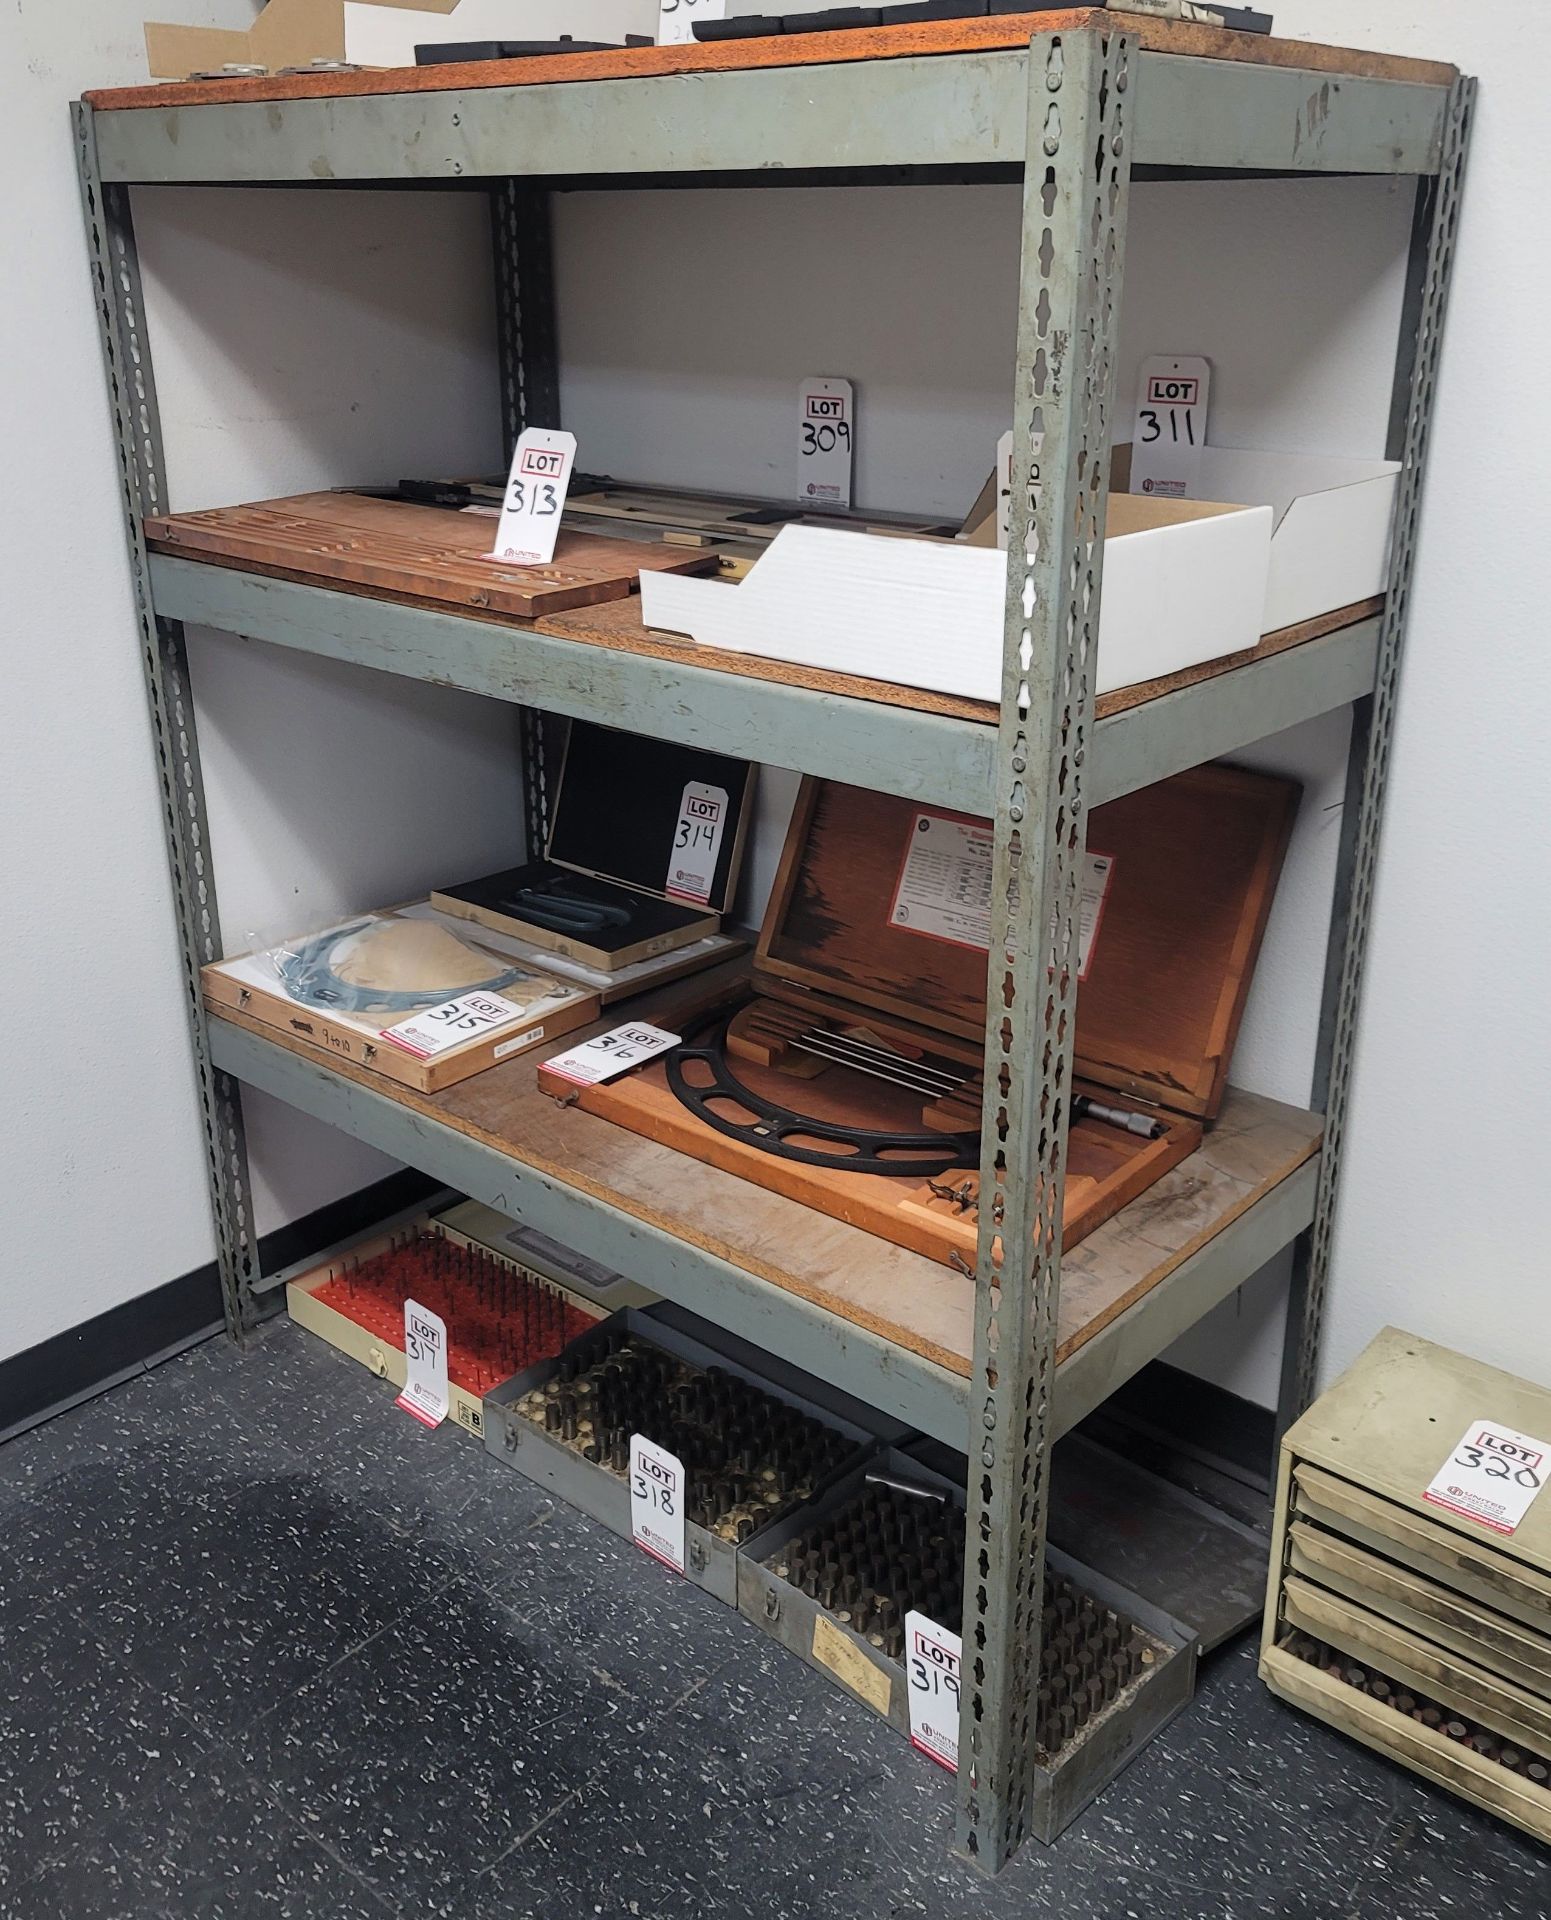 LOT - (2) STEEL SHELF UNITS W/ PARTICLE BOARD SHELVES, 4' X 2' X 5' HT, CONTENTS NOT INCLUDED - Image 2 of 2